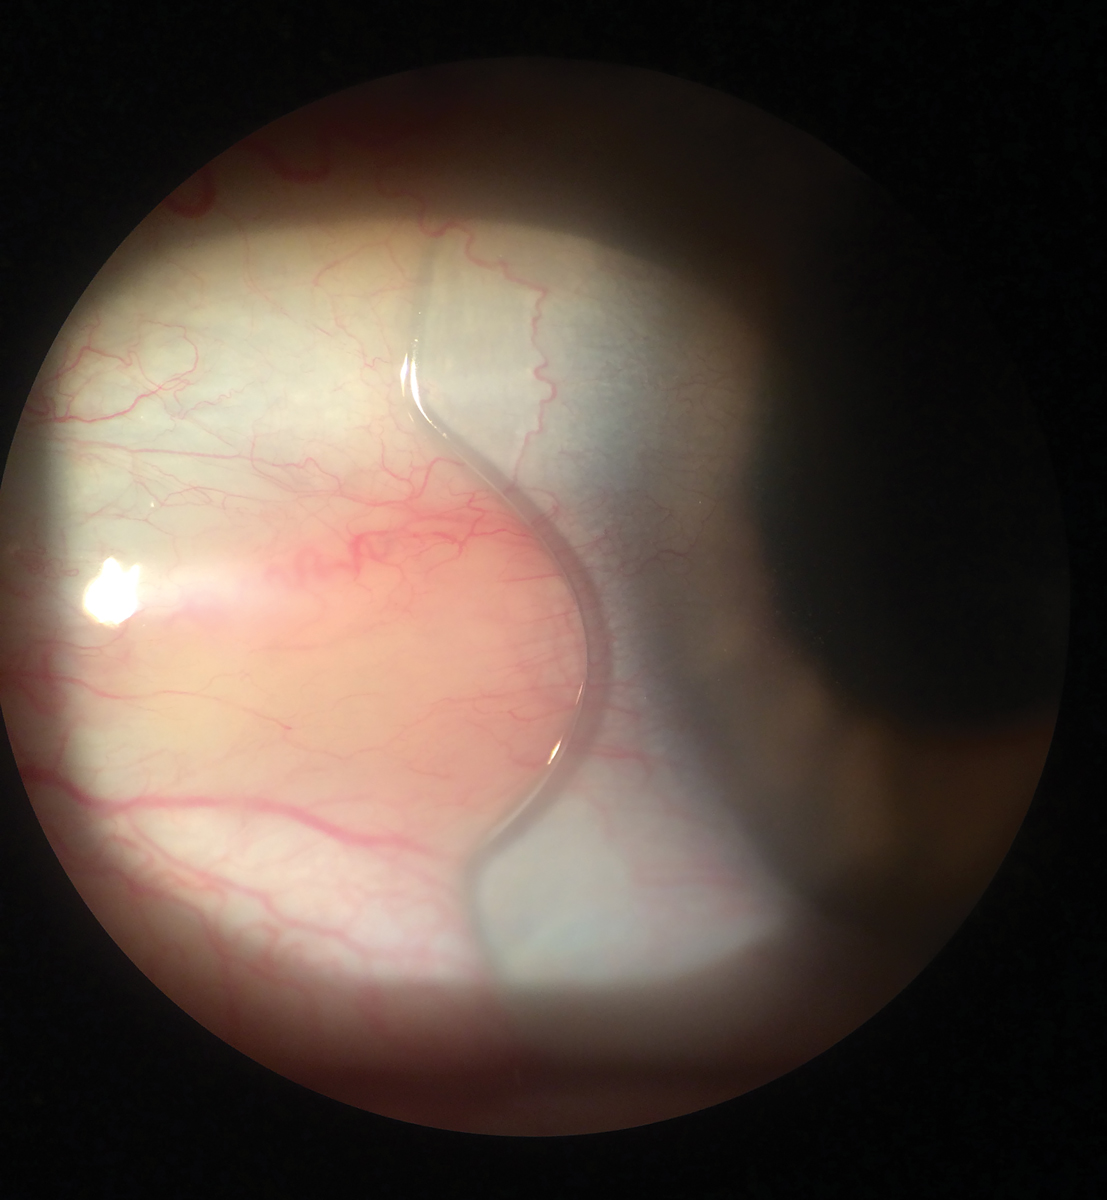 Fig. 4. Scleral lens with a notch to avoid interacting with a pinguecula.